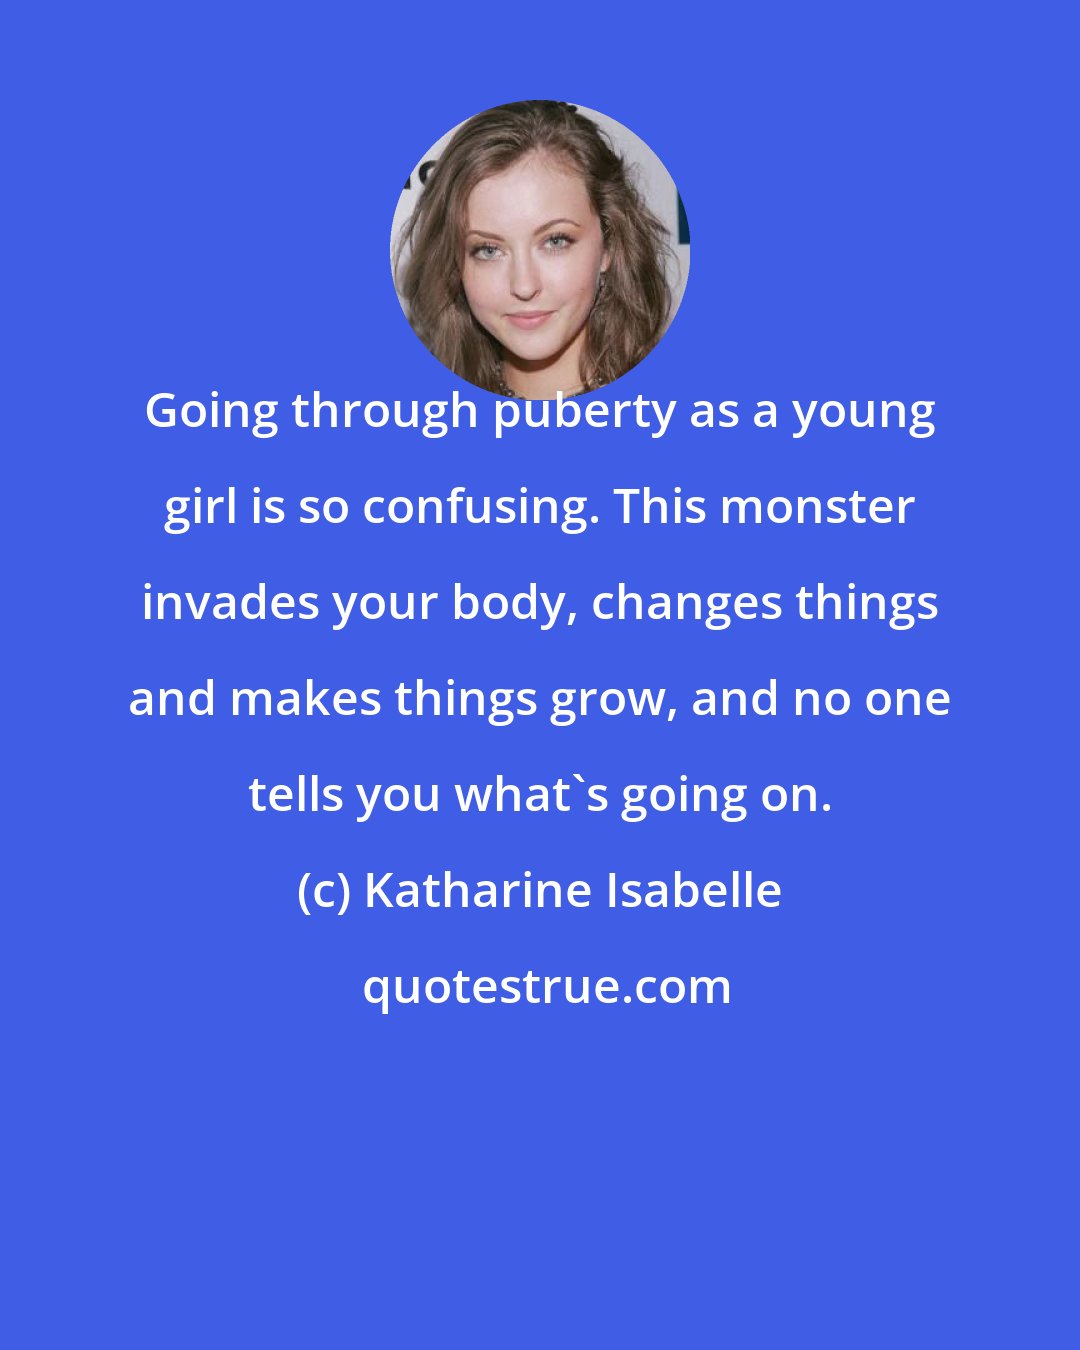 Katharine Isabelle: Going through puberty as a young girl is so confusing. This monster invades your body, changes things and makes things grow, and no one tells you what's going on.